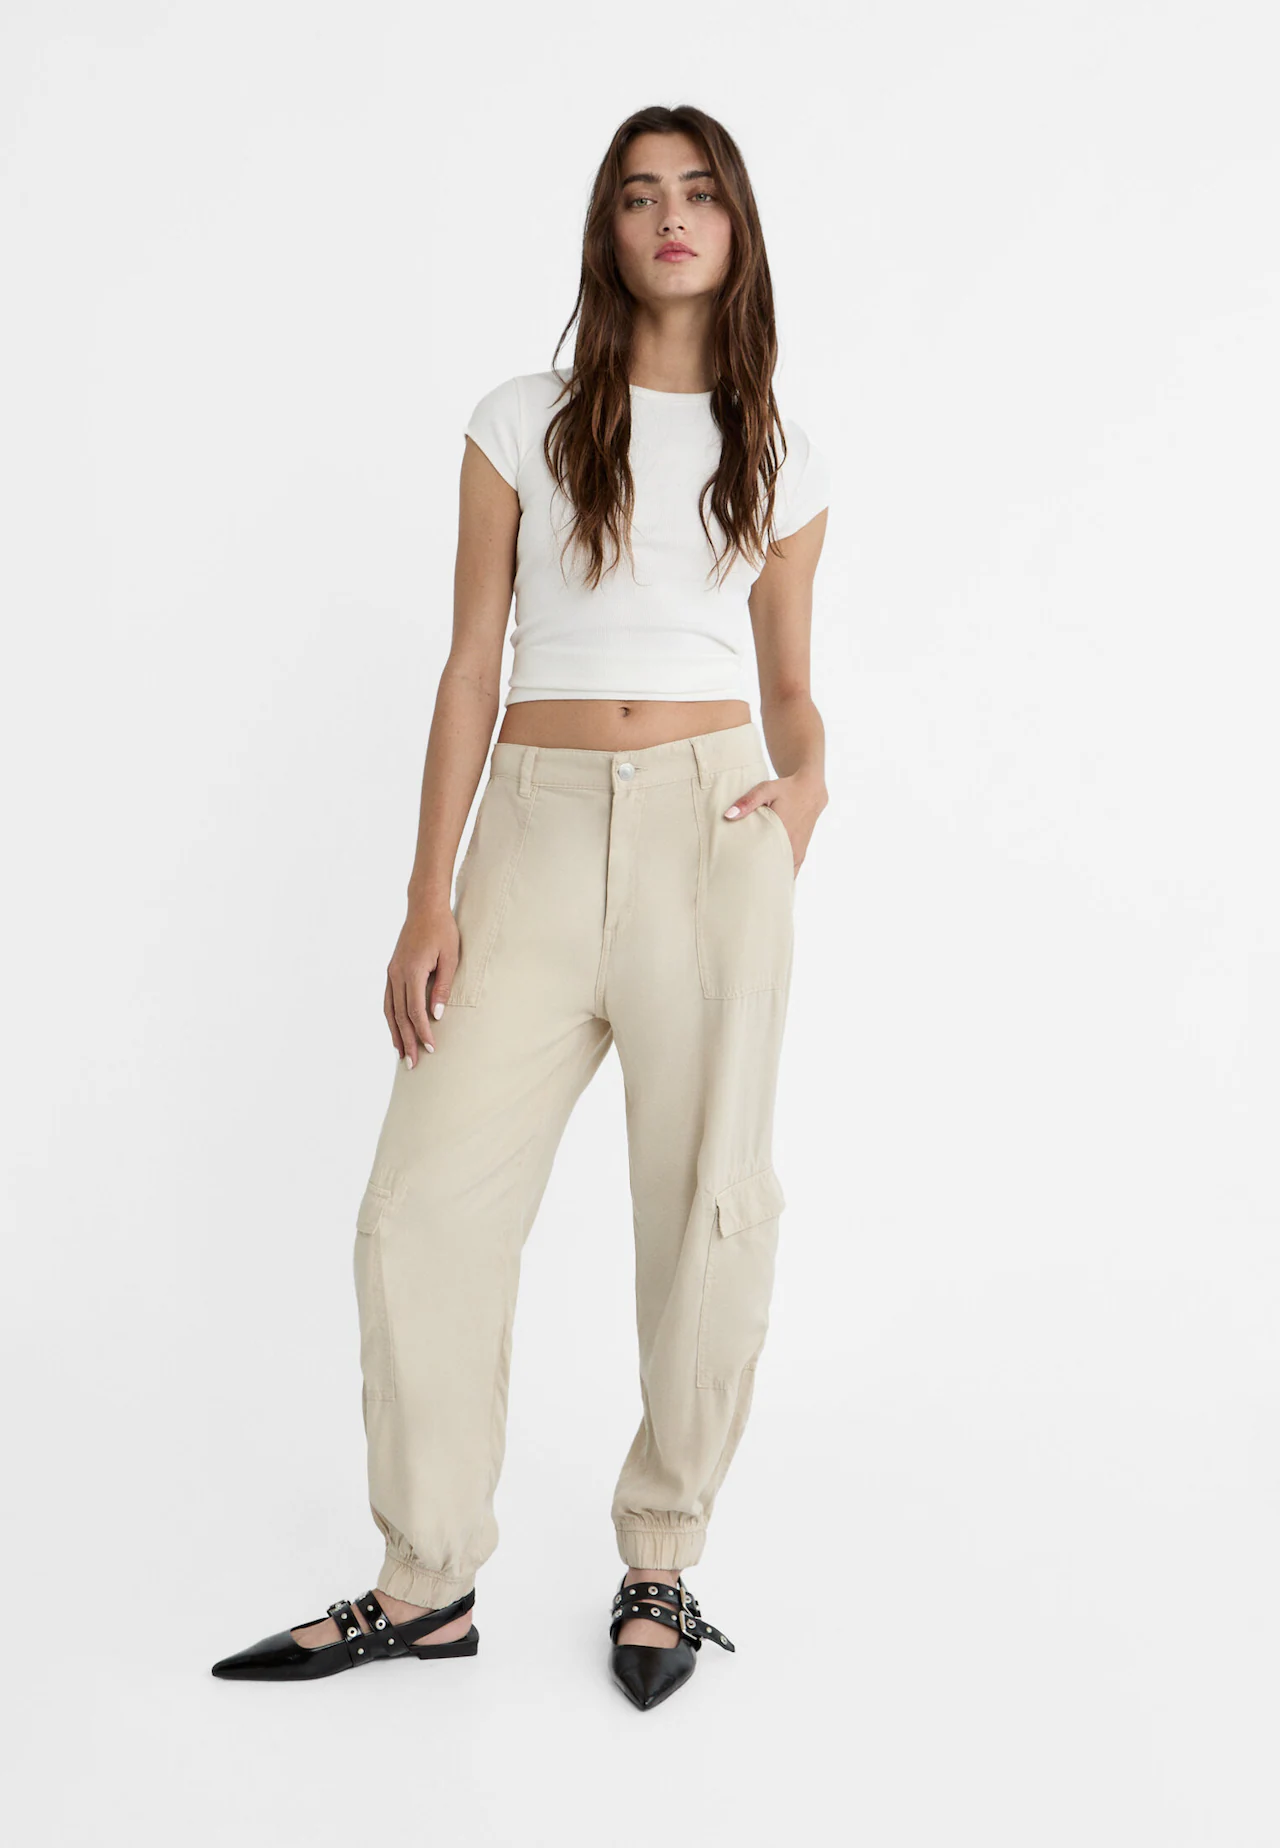 Hip Hop Black Cargo Pants For Men And Women Sweatpants With Ribbons,  Streetwear Harem Pants, And Fashions Stradivarius Cargo Trousers Style  #230726 From Mang04, $14.68